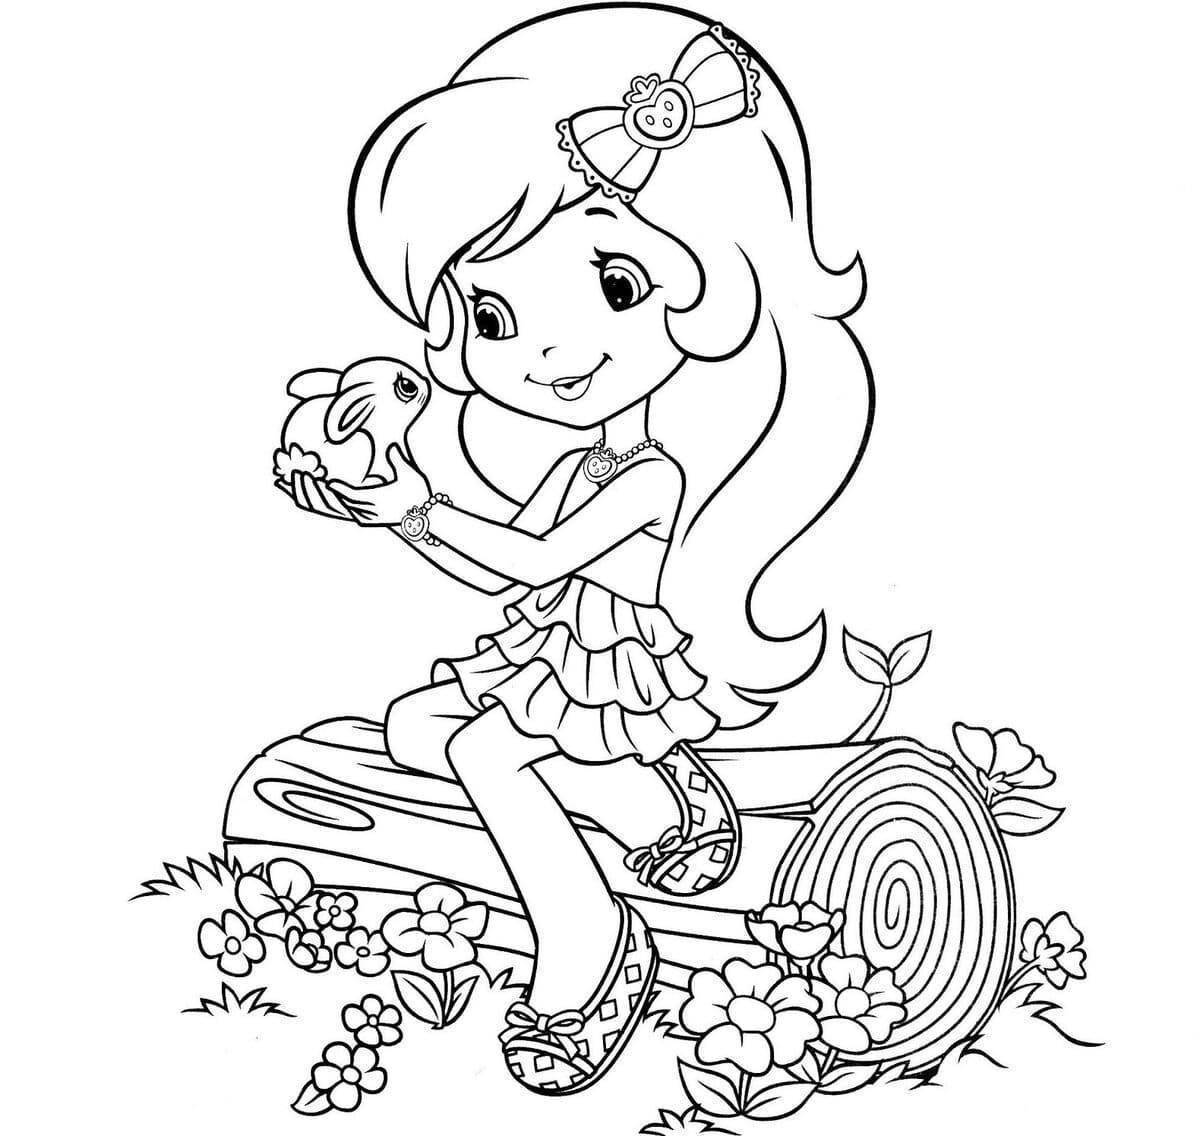 Fun coloring book for girls 5-7 years old